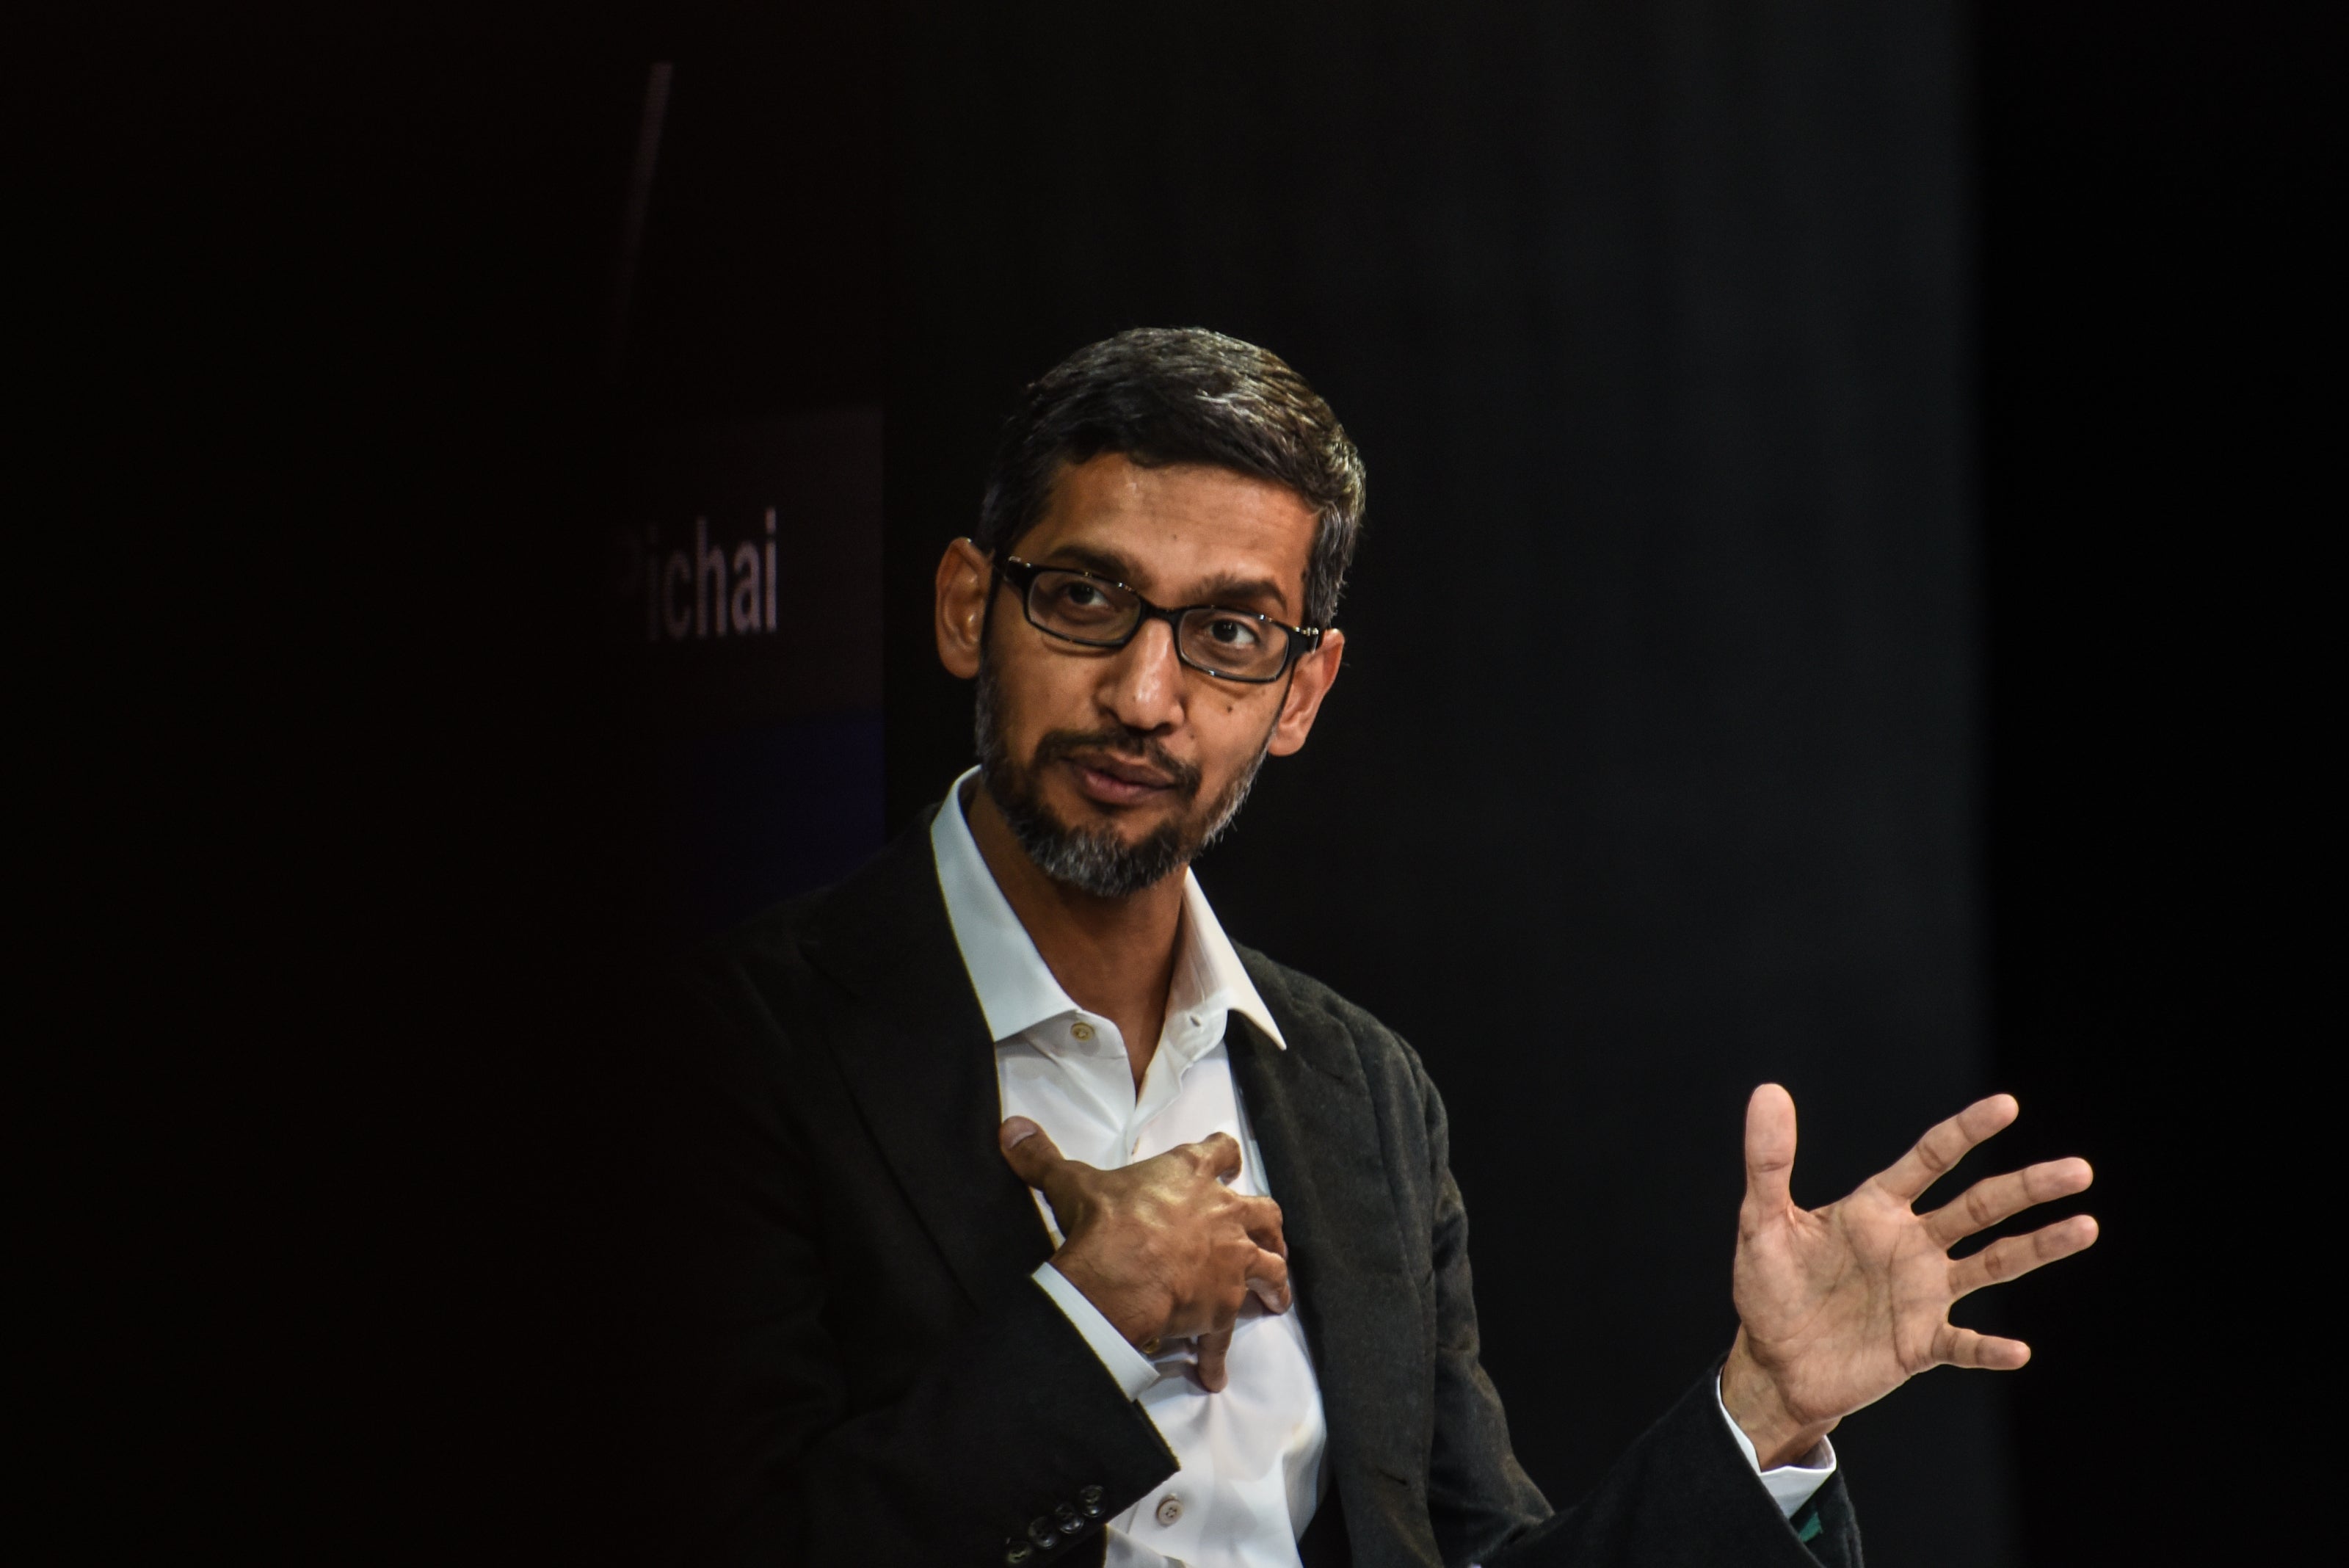 Sundar Pichai speaks at the New York Times DealBook conference in New York City